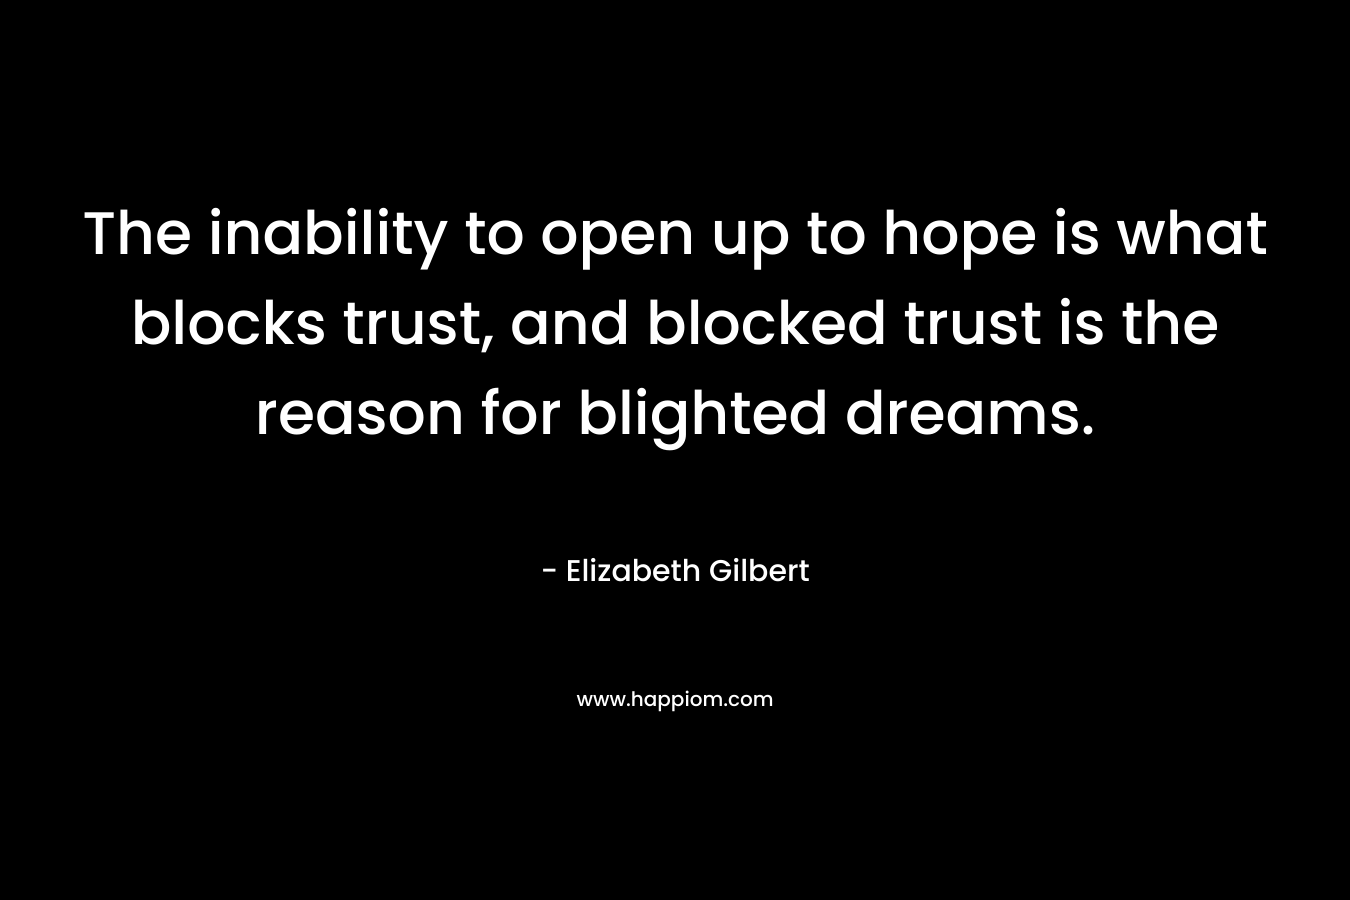 The inability to open up to hope is what blocks trust, and blocked trust is the reason for blighted dreams. – Elizabeth Gilbert